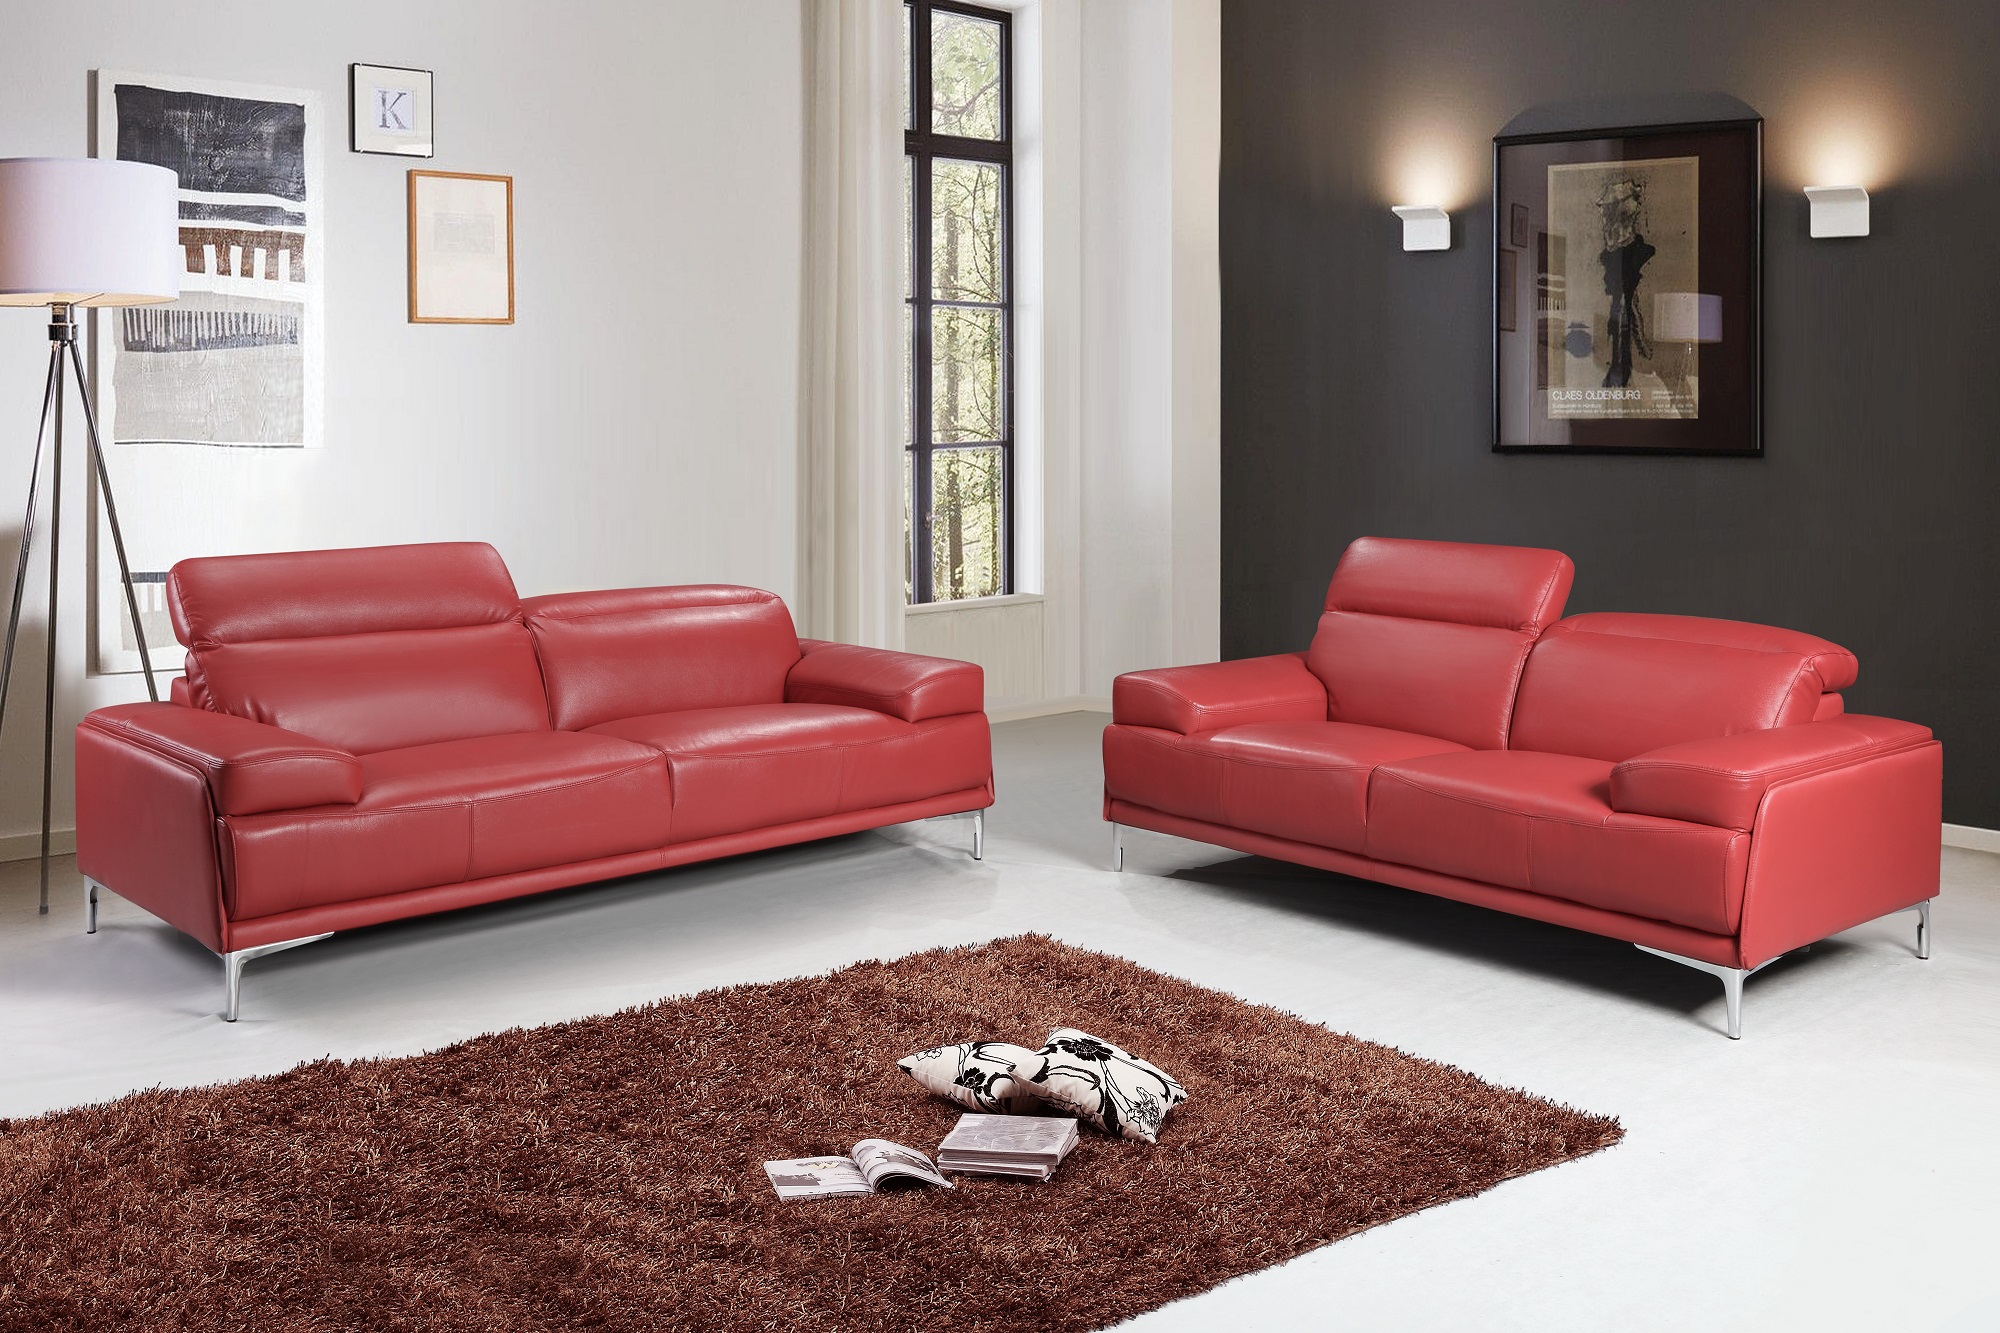 red wine off leather sofa